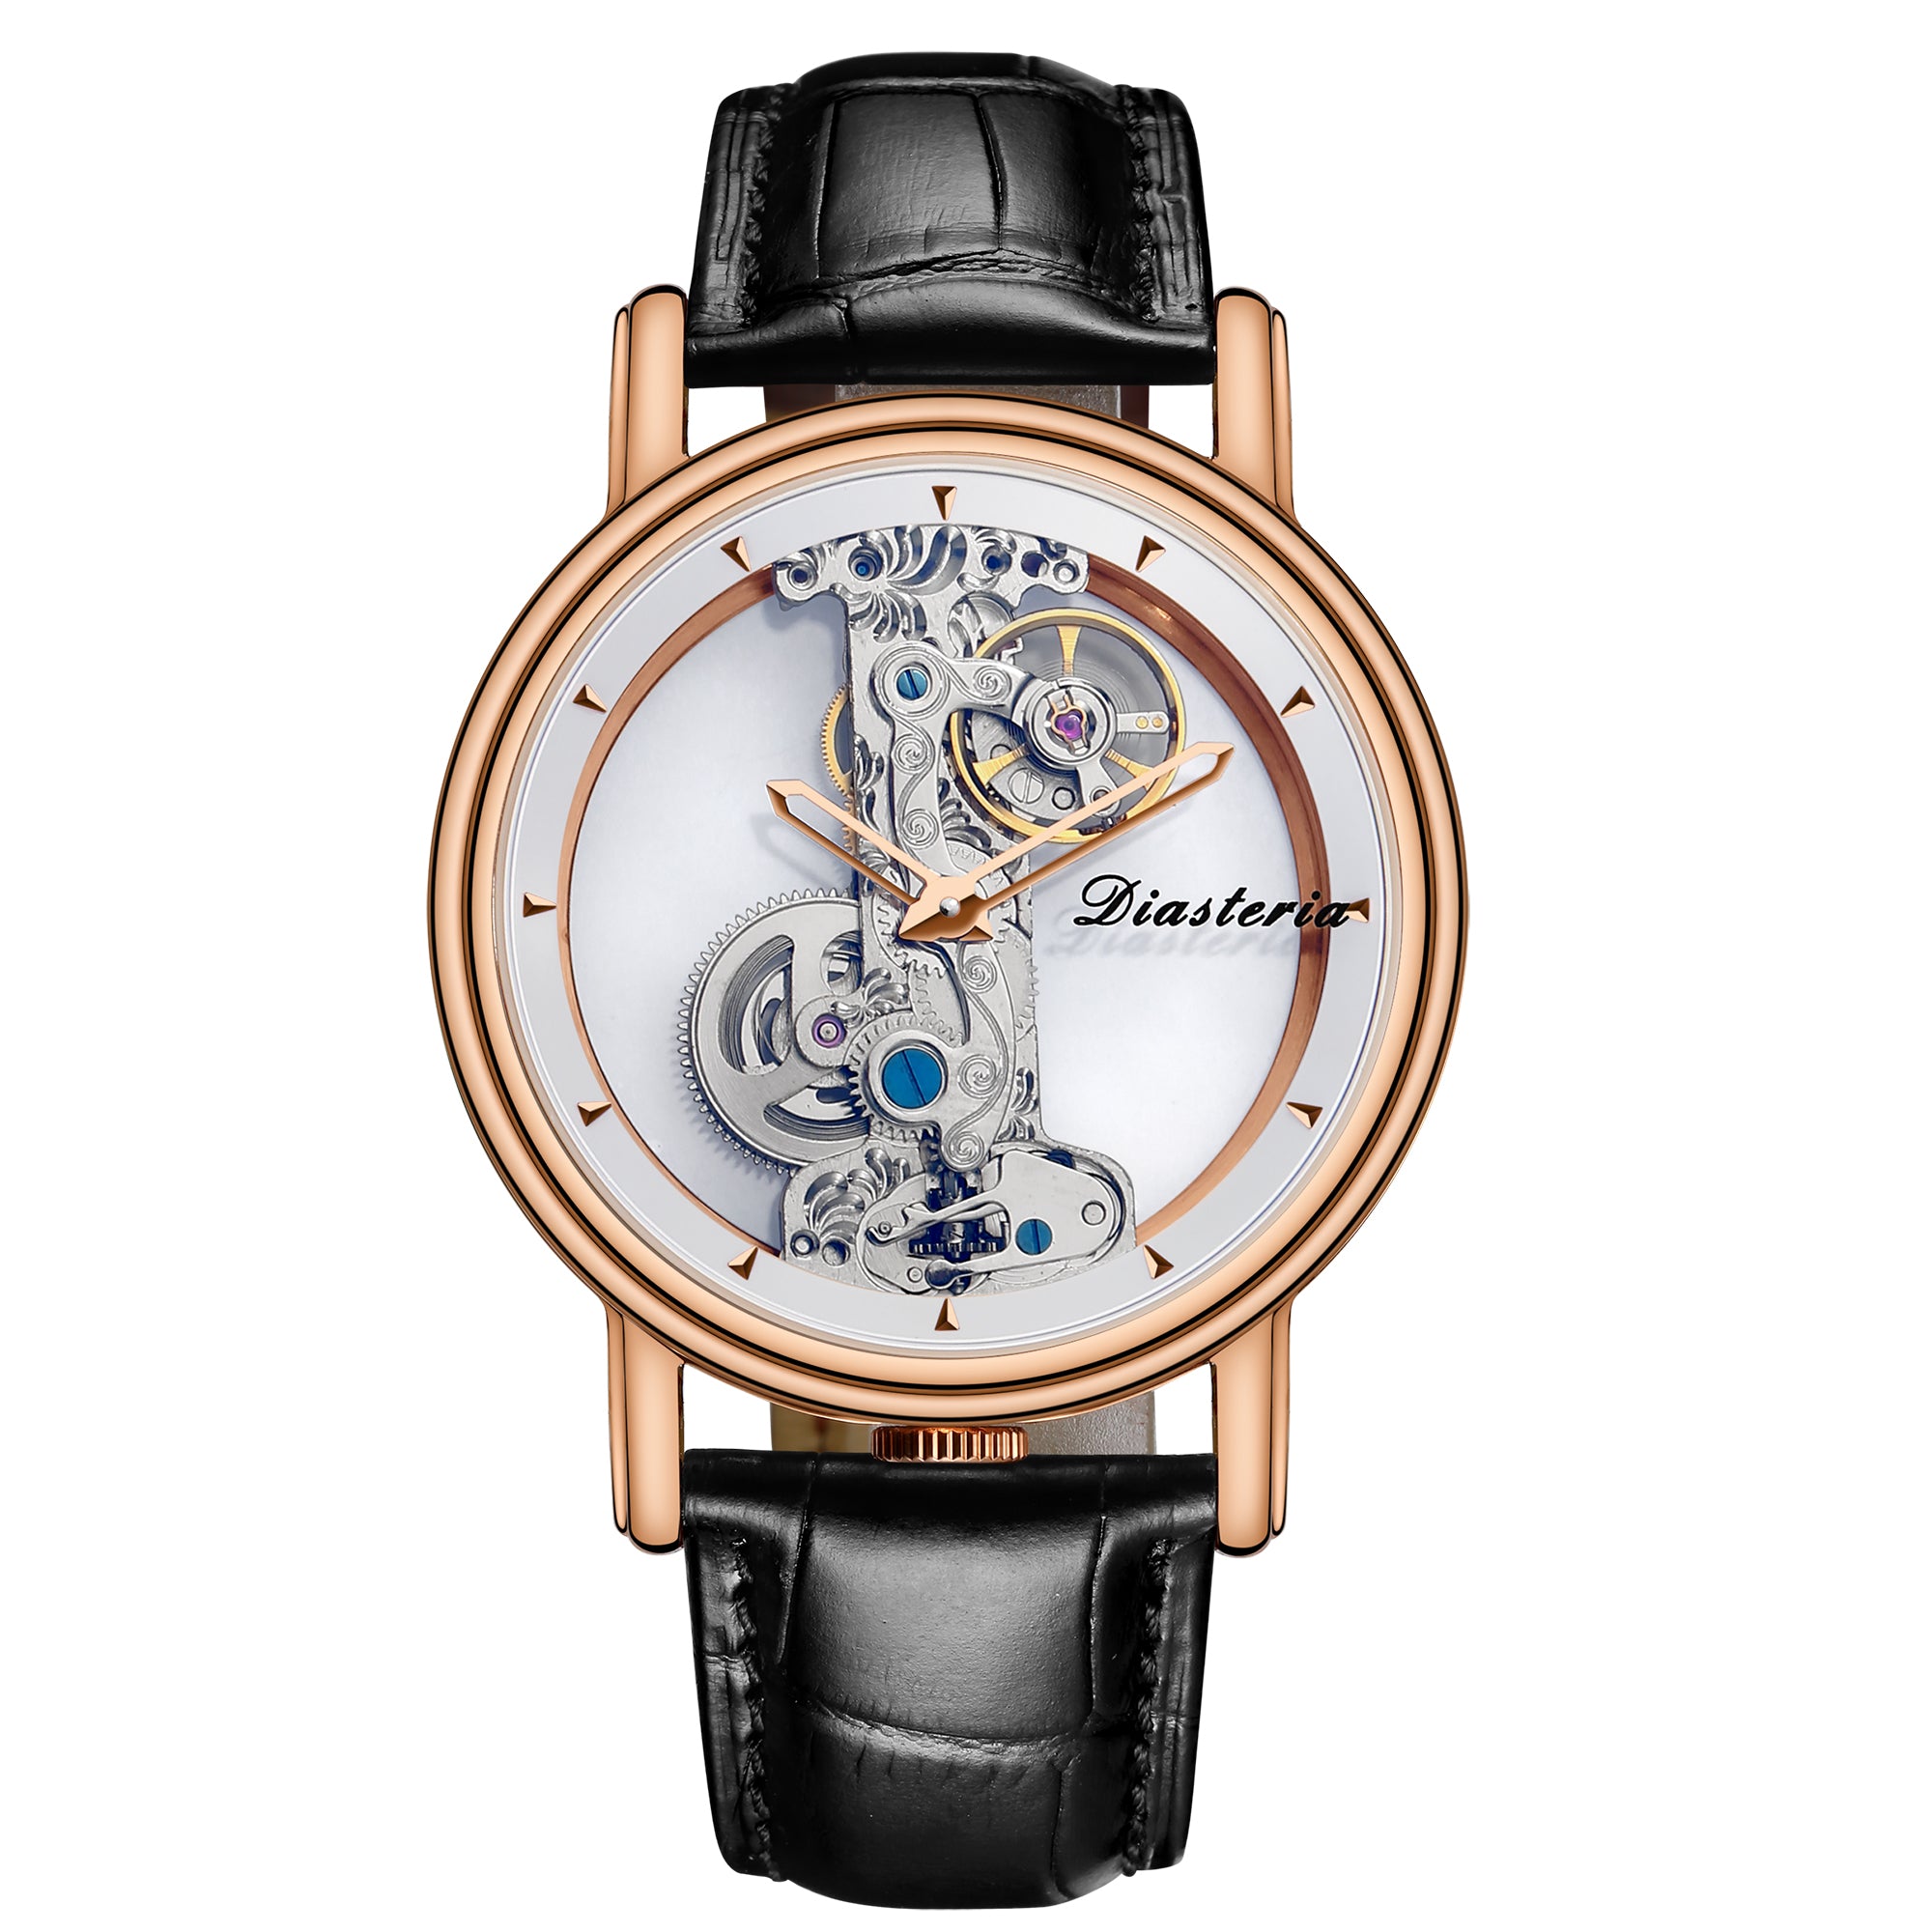 Double-sided hollow men's automatic mechanical watch